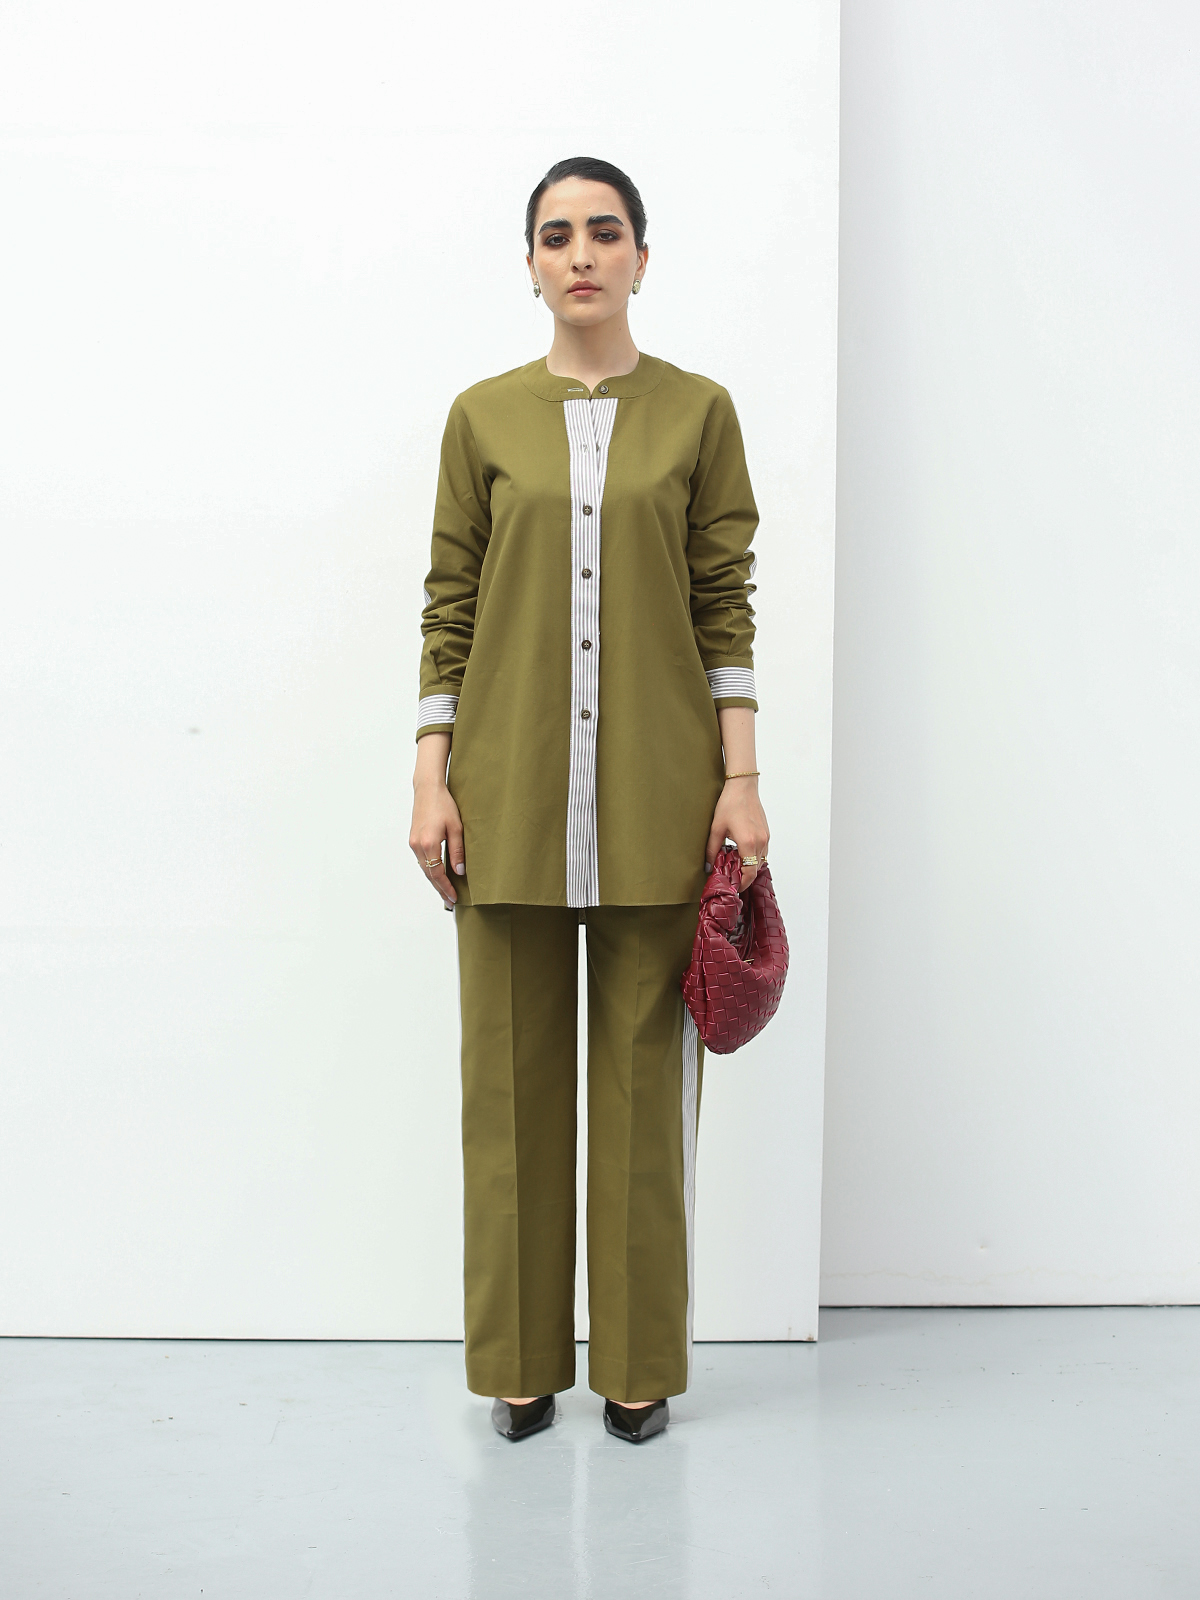 Olive Green Co-Ord Set by The Kuku Store, Pakistan.